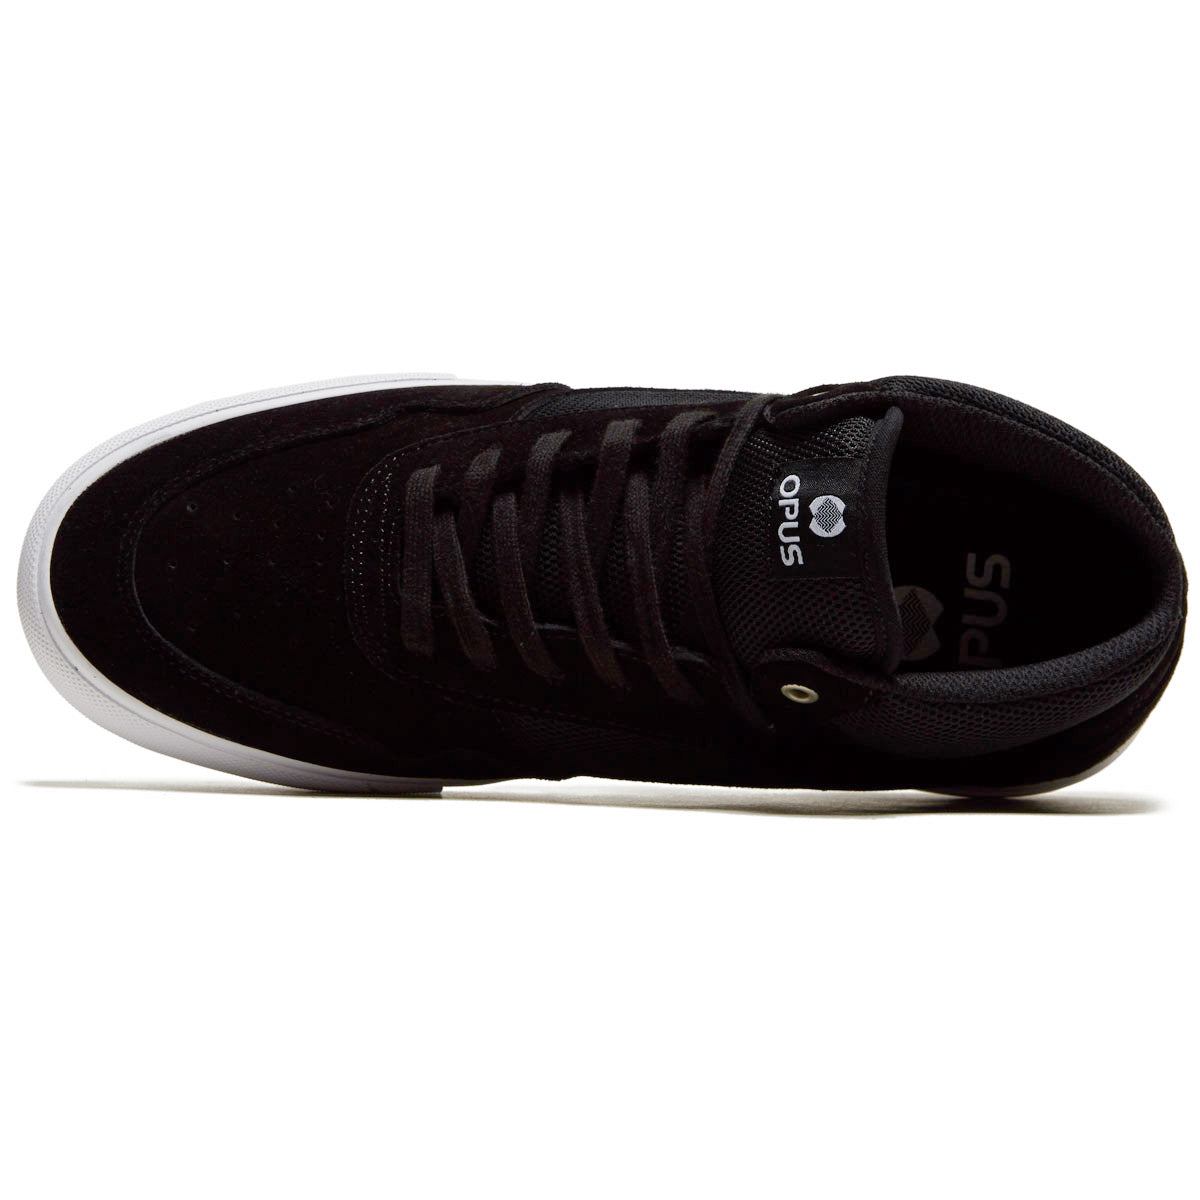 Opus Standard Mid Shoes - Black/White image 3